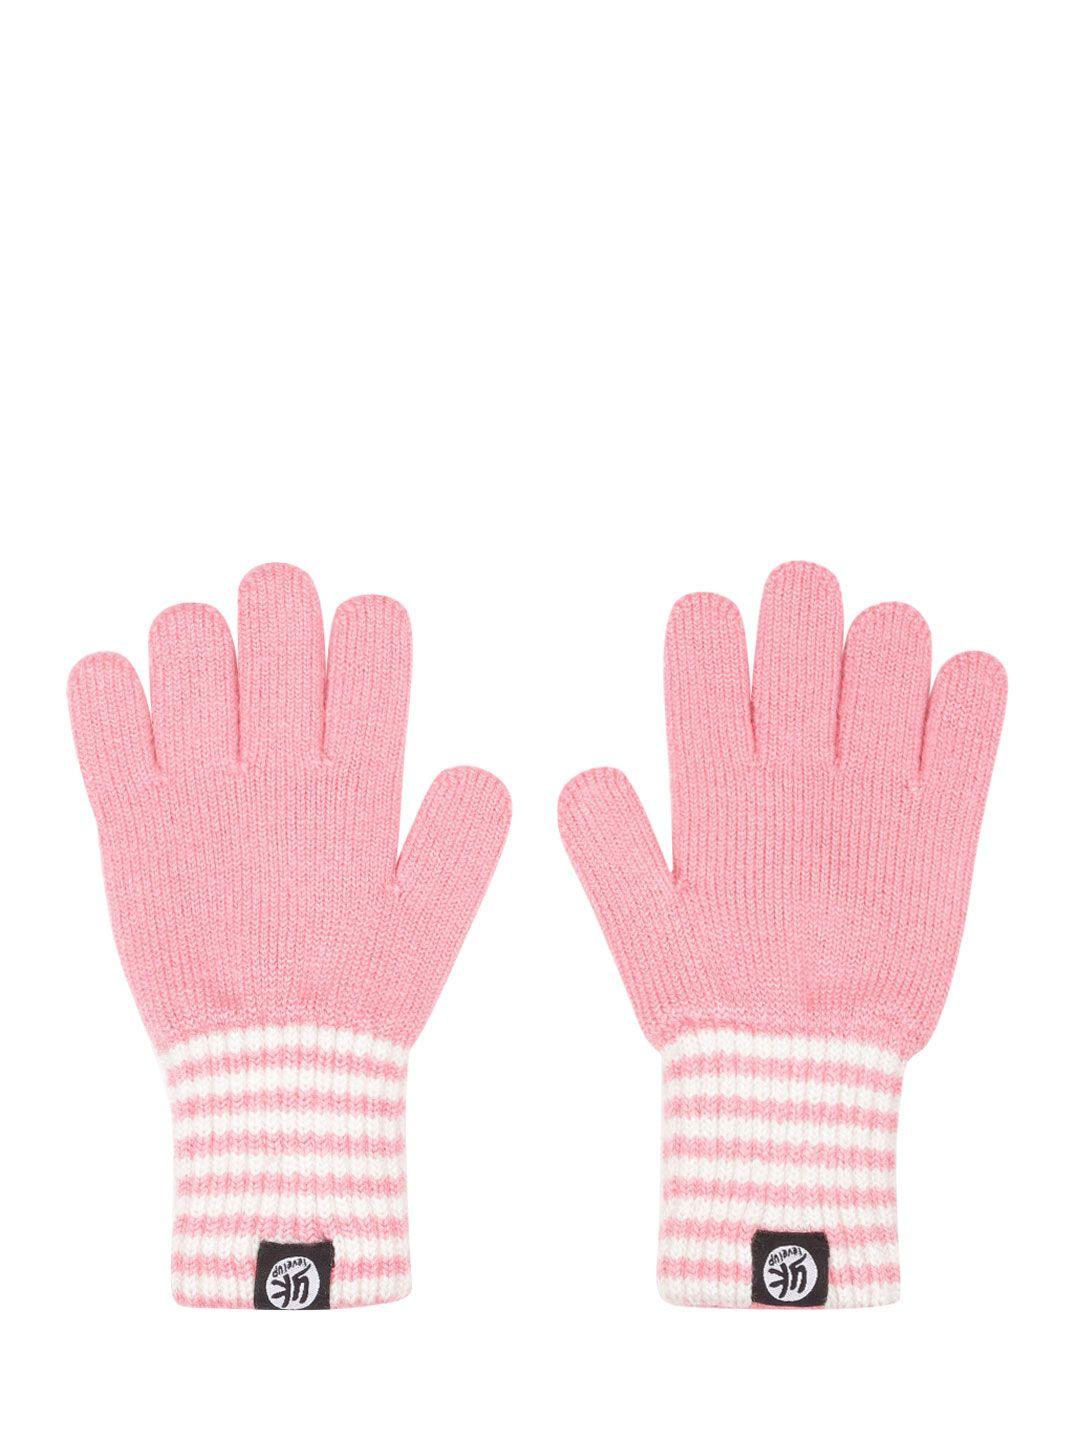 yk kids pink & white solid hand gloves with striped detail